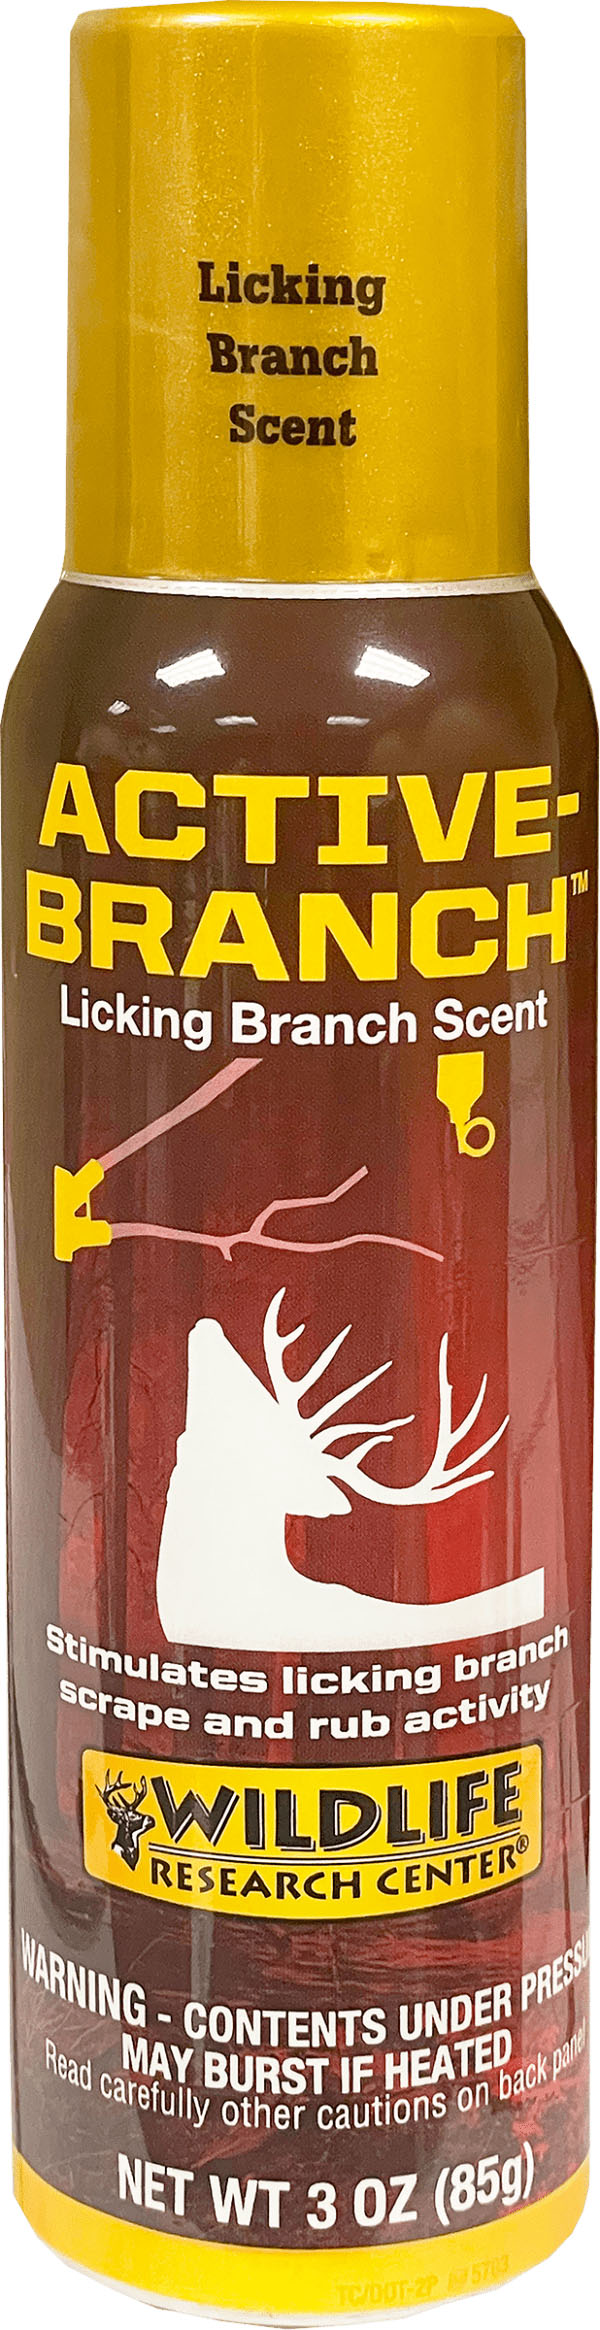 WR ACTIVE-BRANCH SPRAY CAN - Scents & Calls